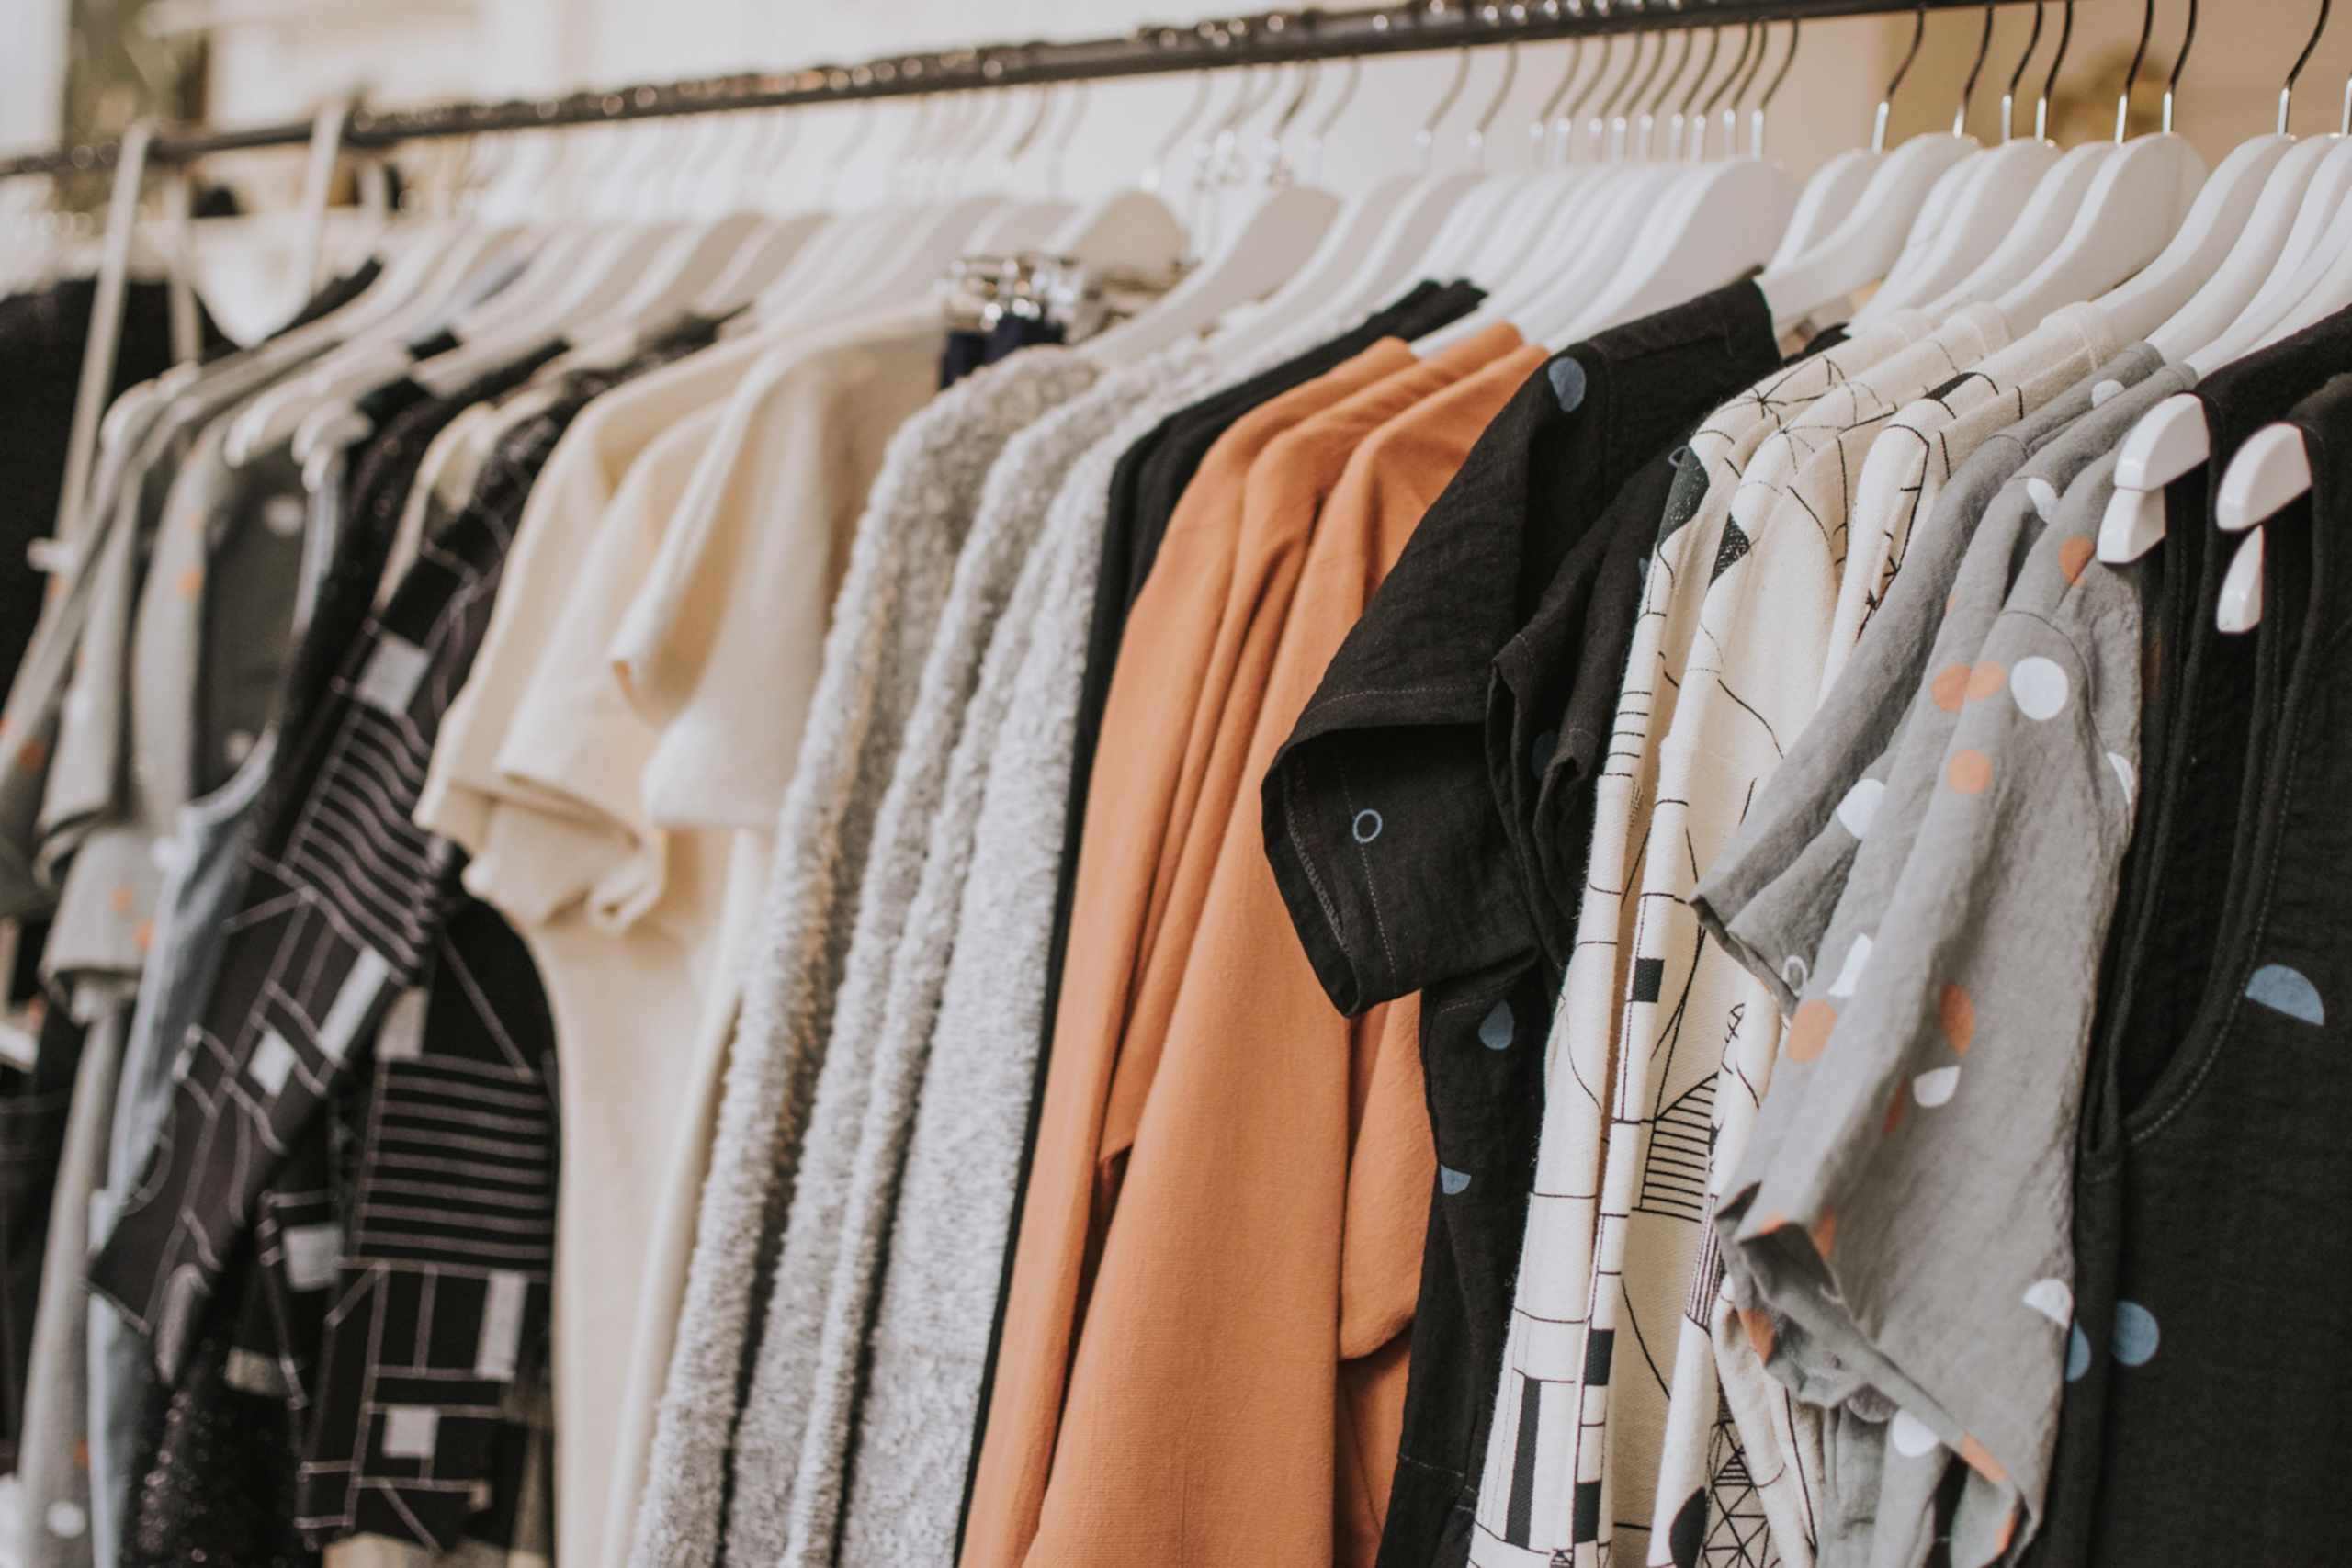 New Clothes: 4 Essential Tips to Budget for Clothes [updated 2020]